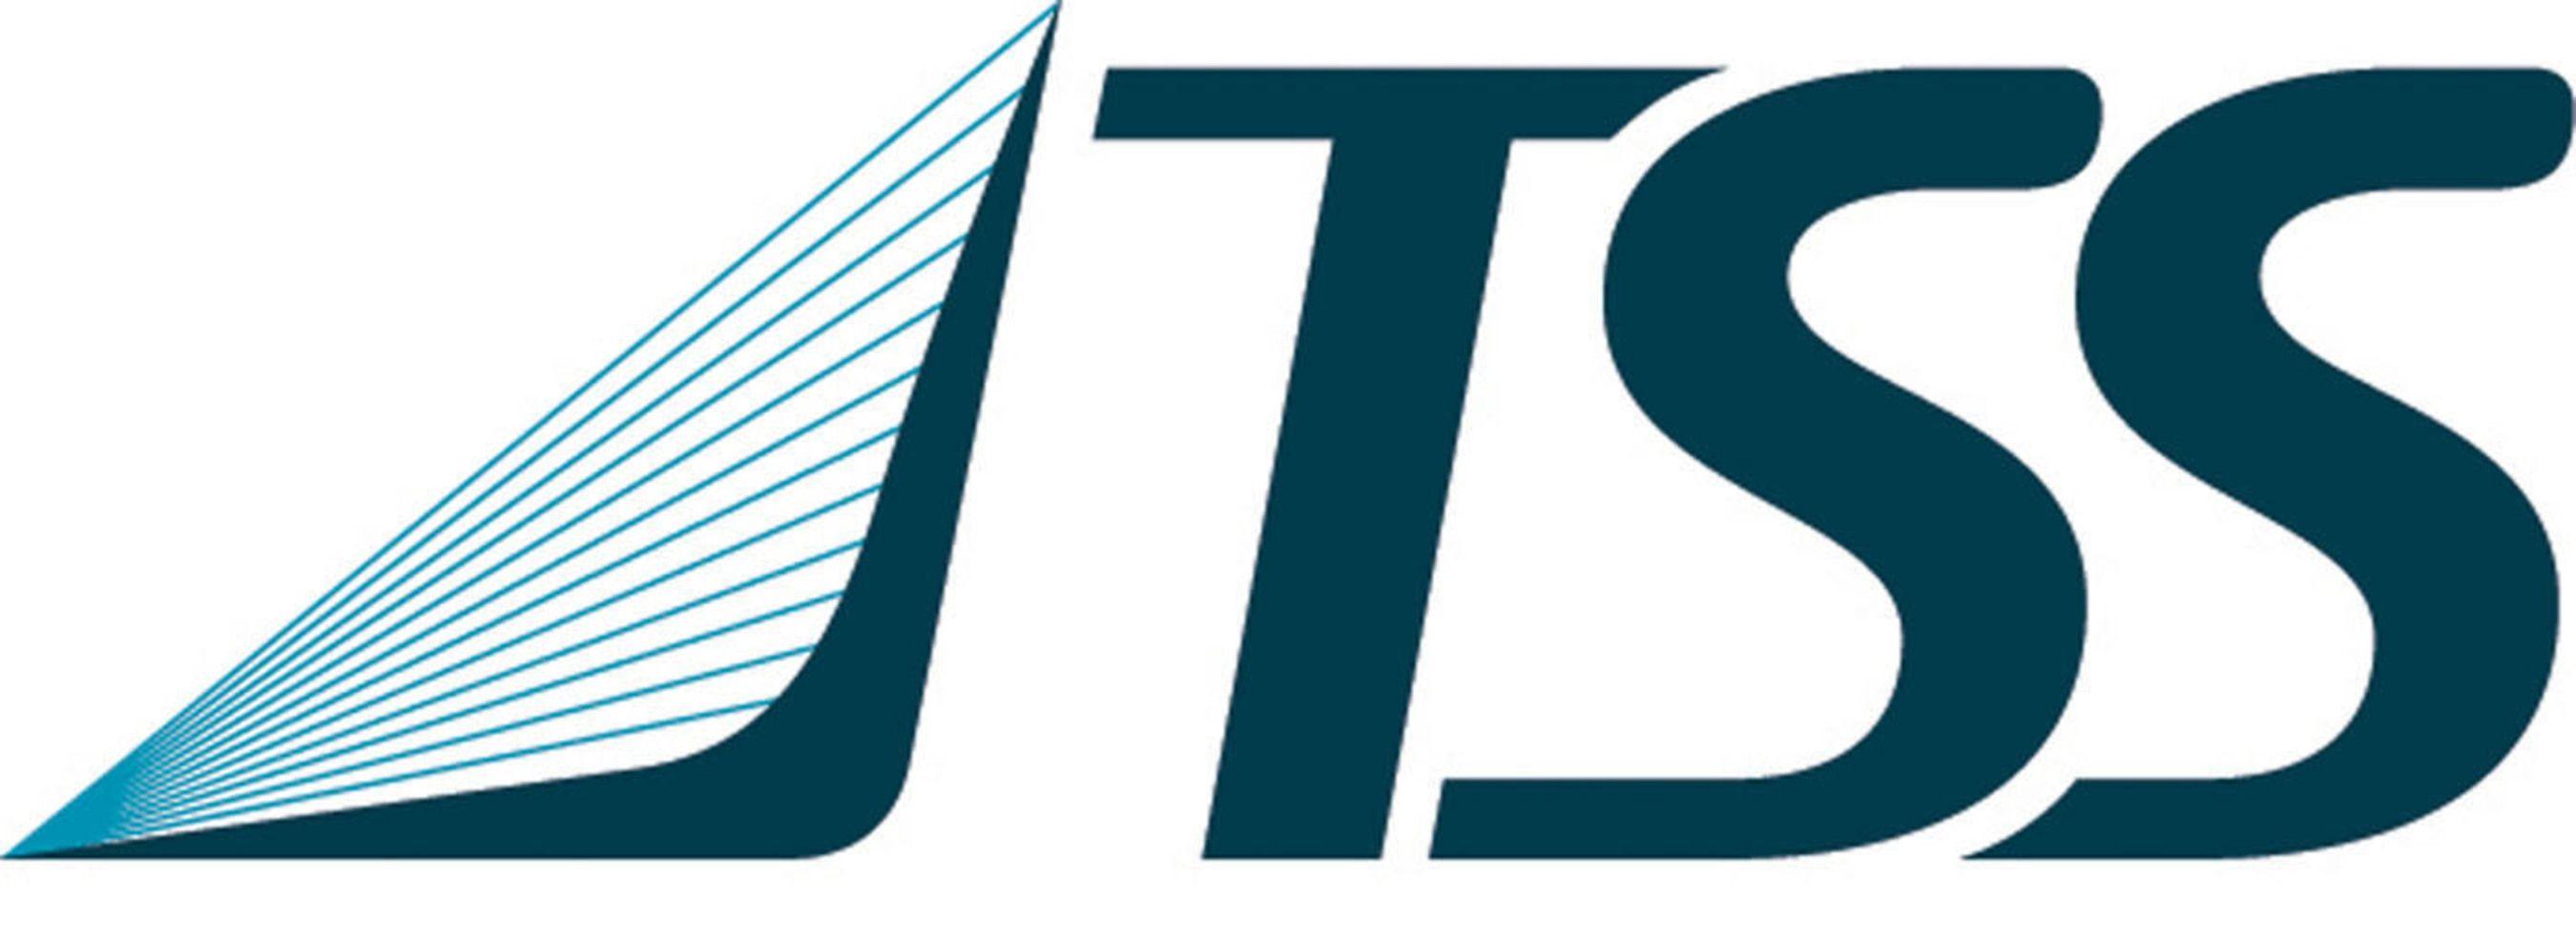 TSS Logo - TSS, Inc. To Report Fourth Quarter And Fiscal 2016 Results On Monday